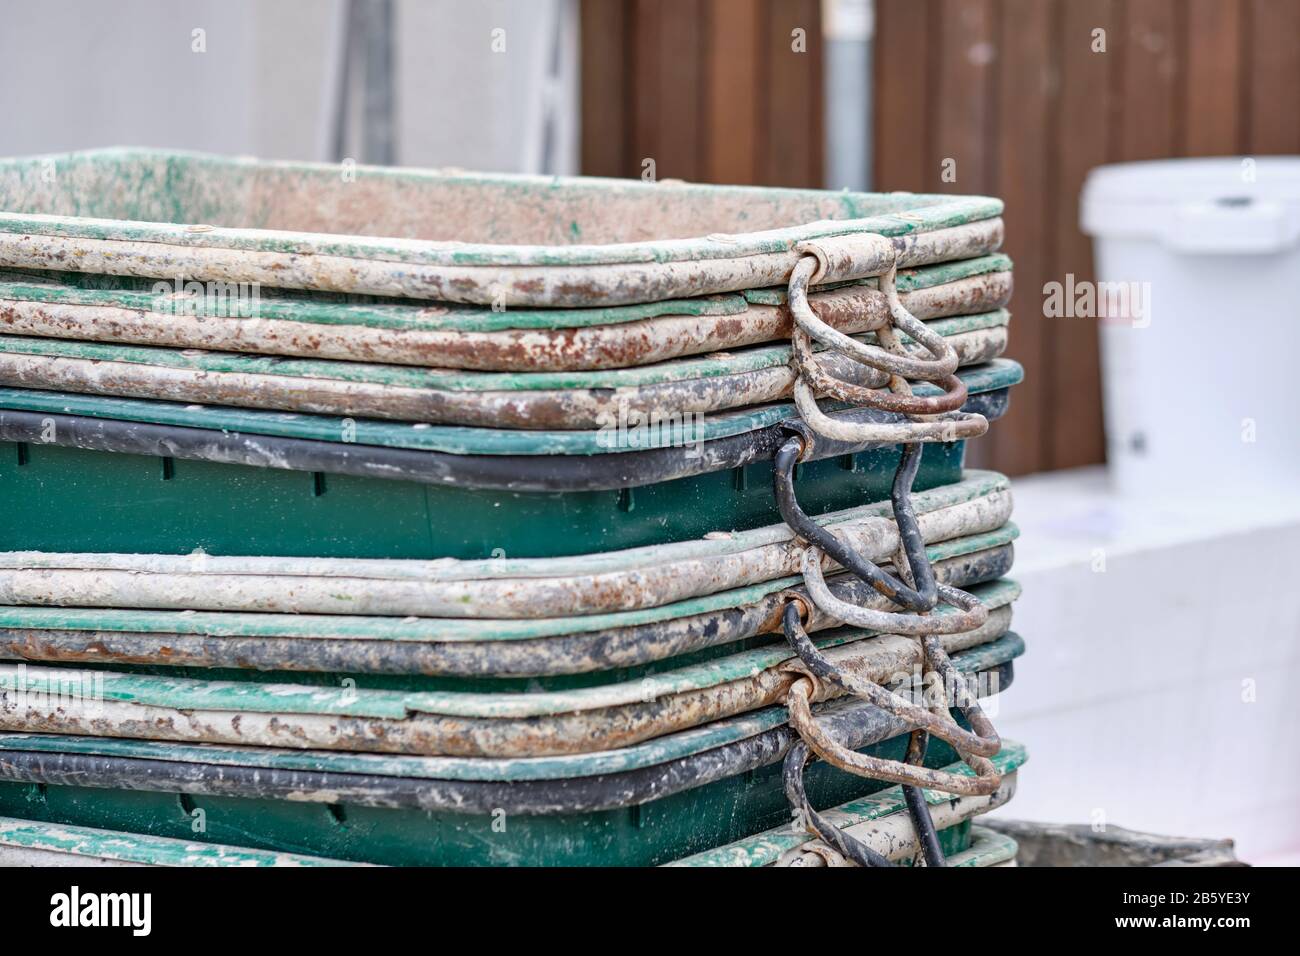 Close-up of a stack of dirty rectangular mortar buckets on a building site. Seen in Germany in February Stock Photo